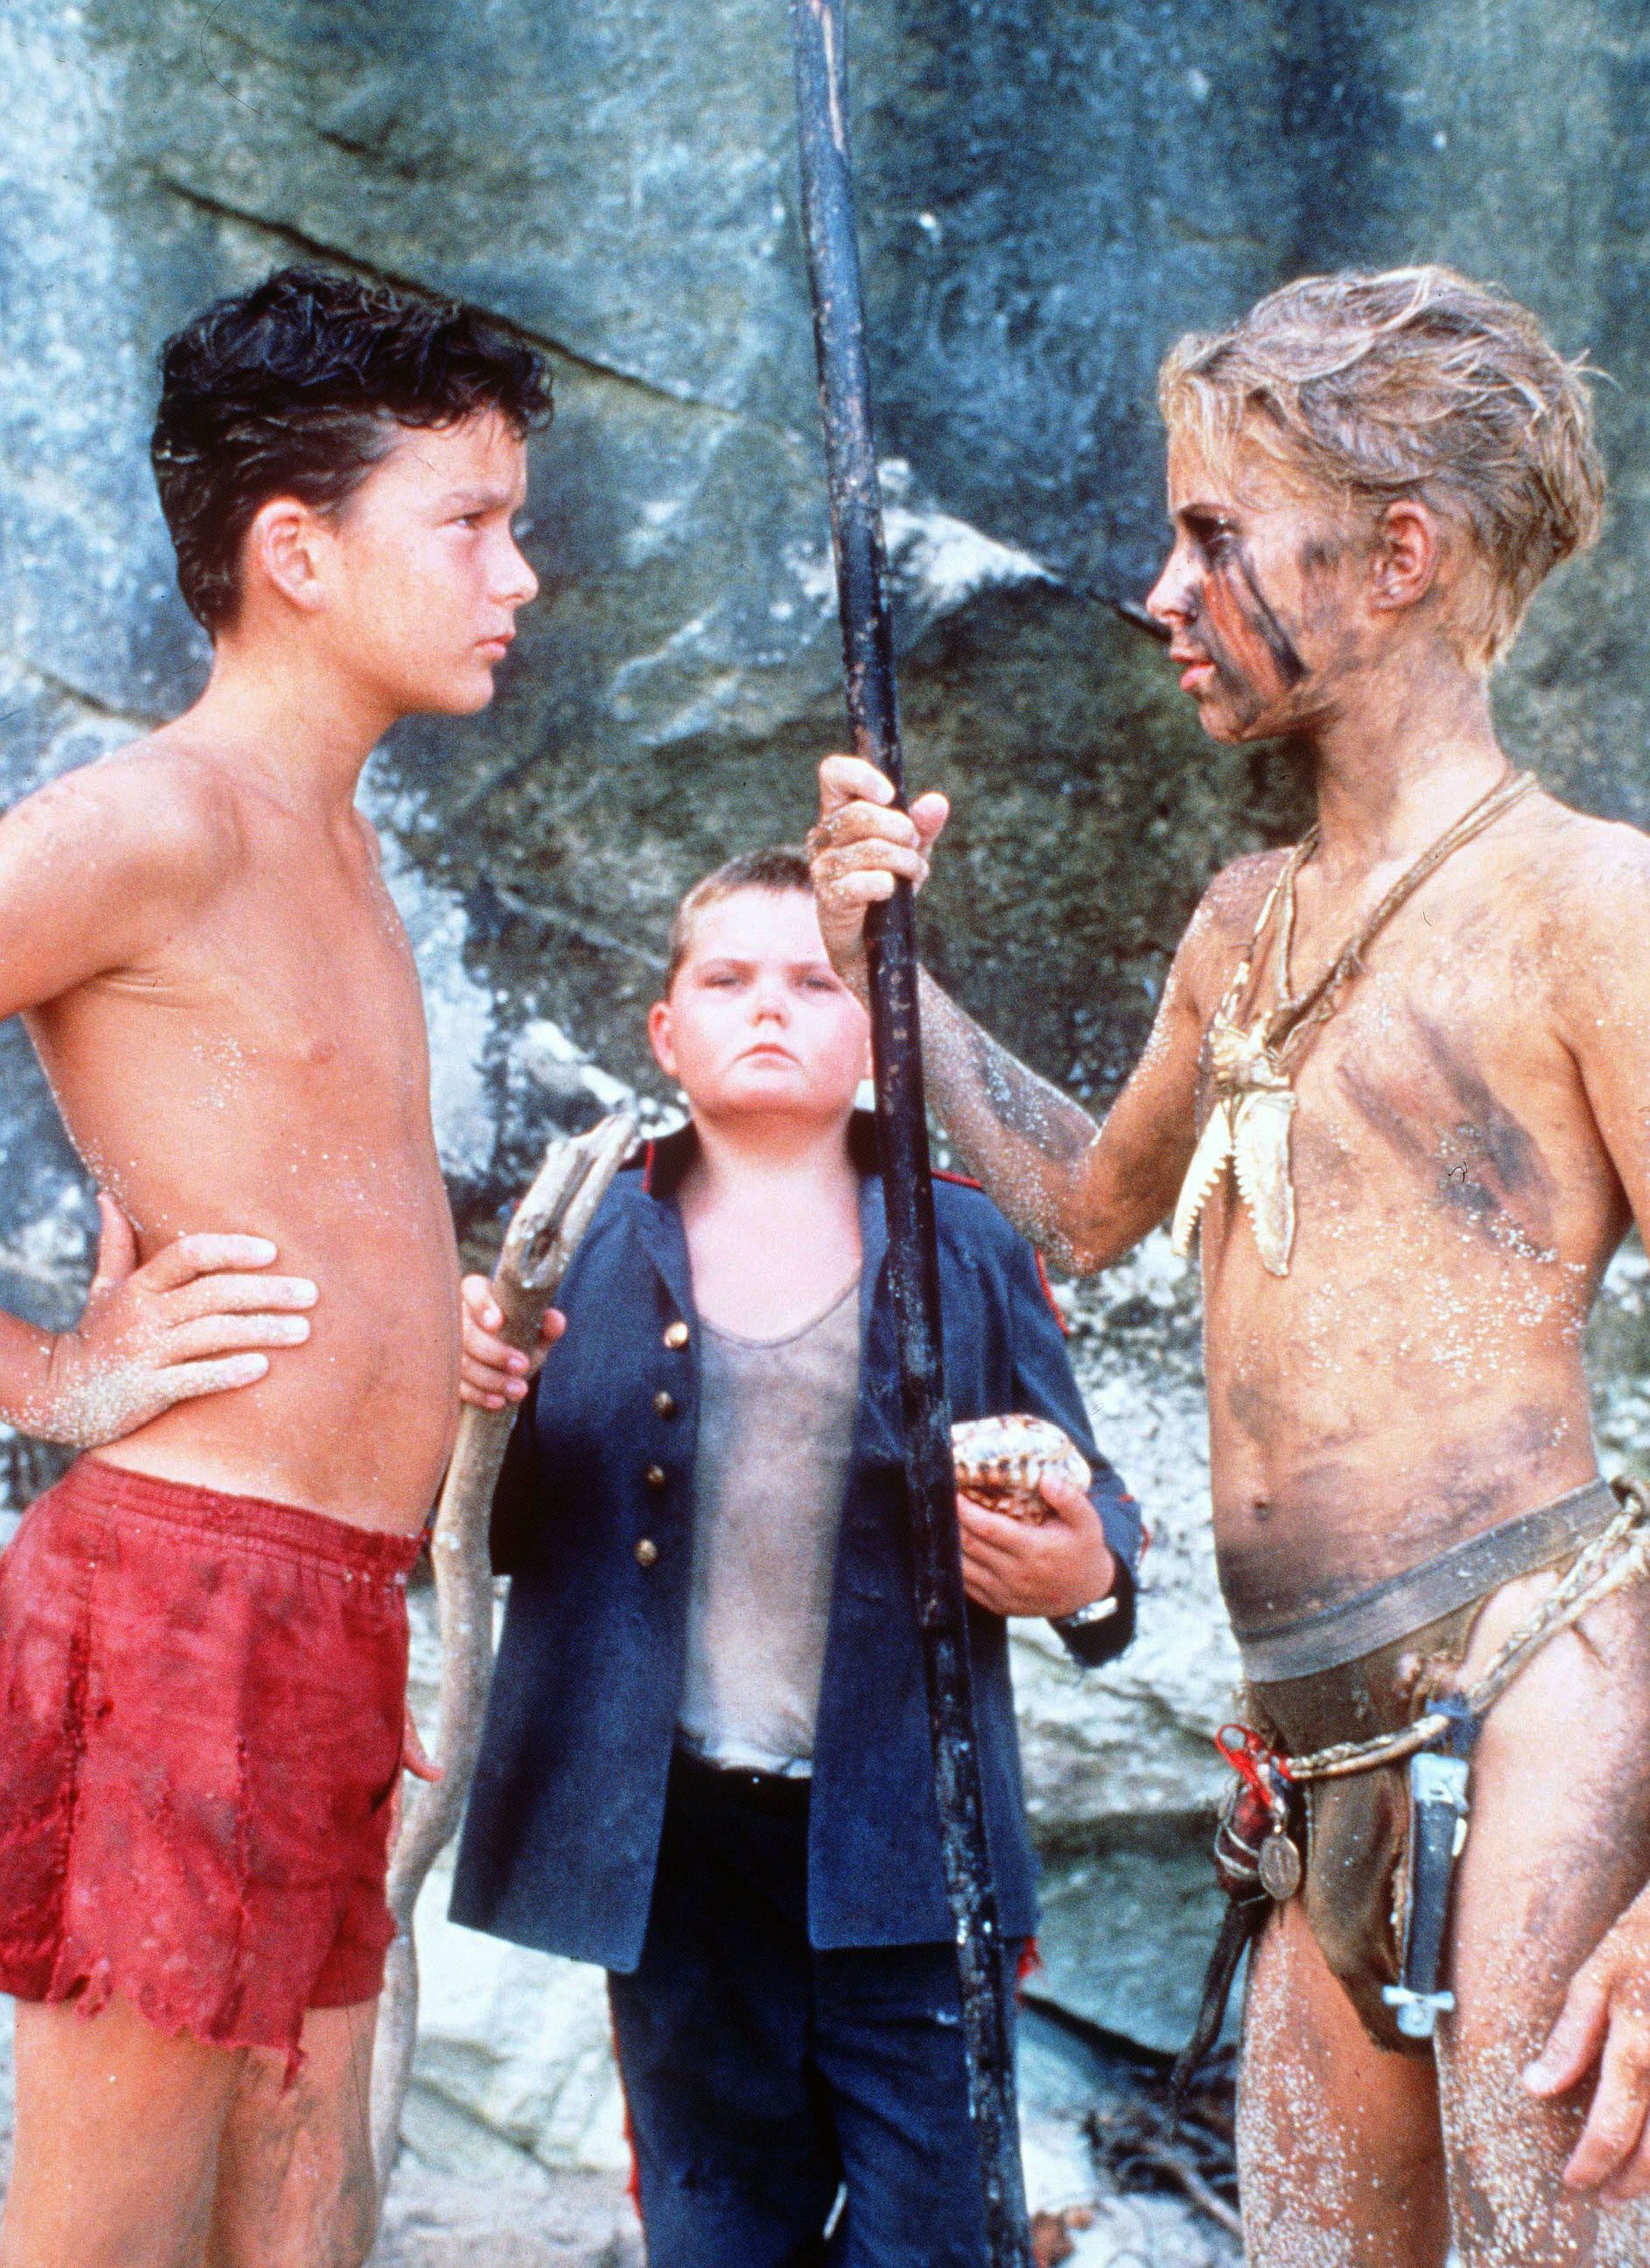 All Female Lord Of The Flies Remake Sparks Criticism